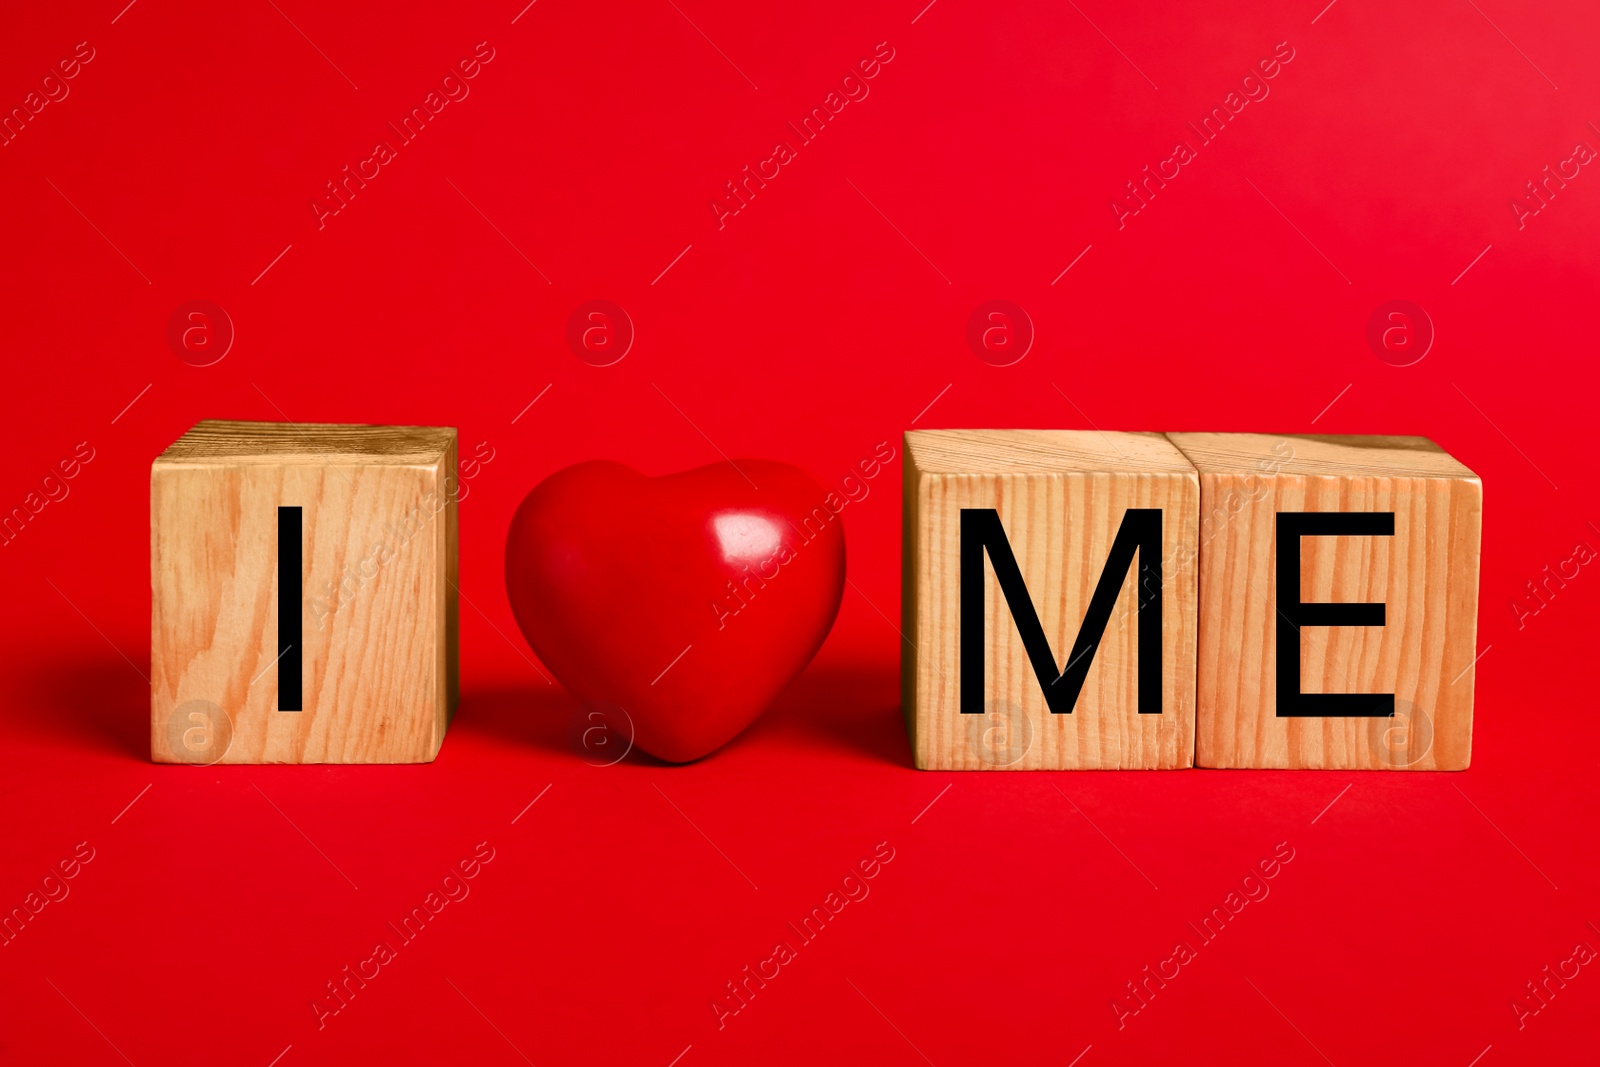 Photo of Phrase I Love Me made with wooden cubes and heart on red background